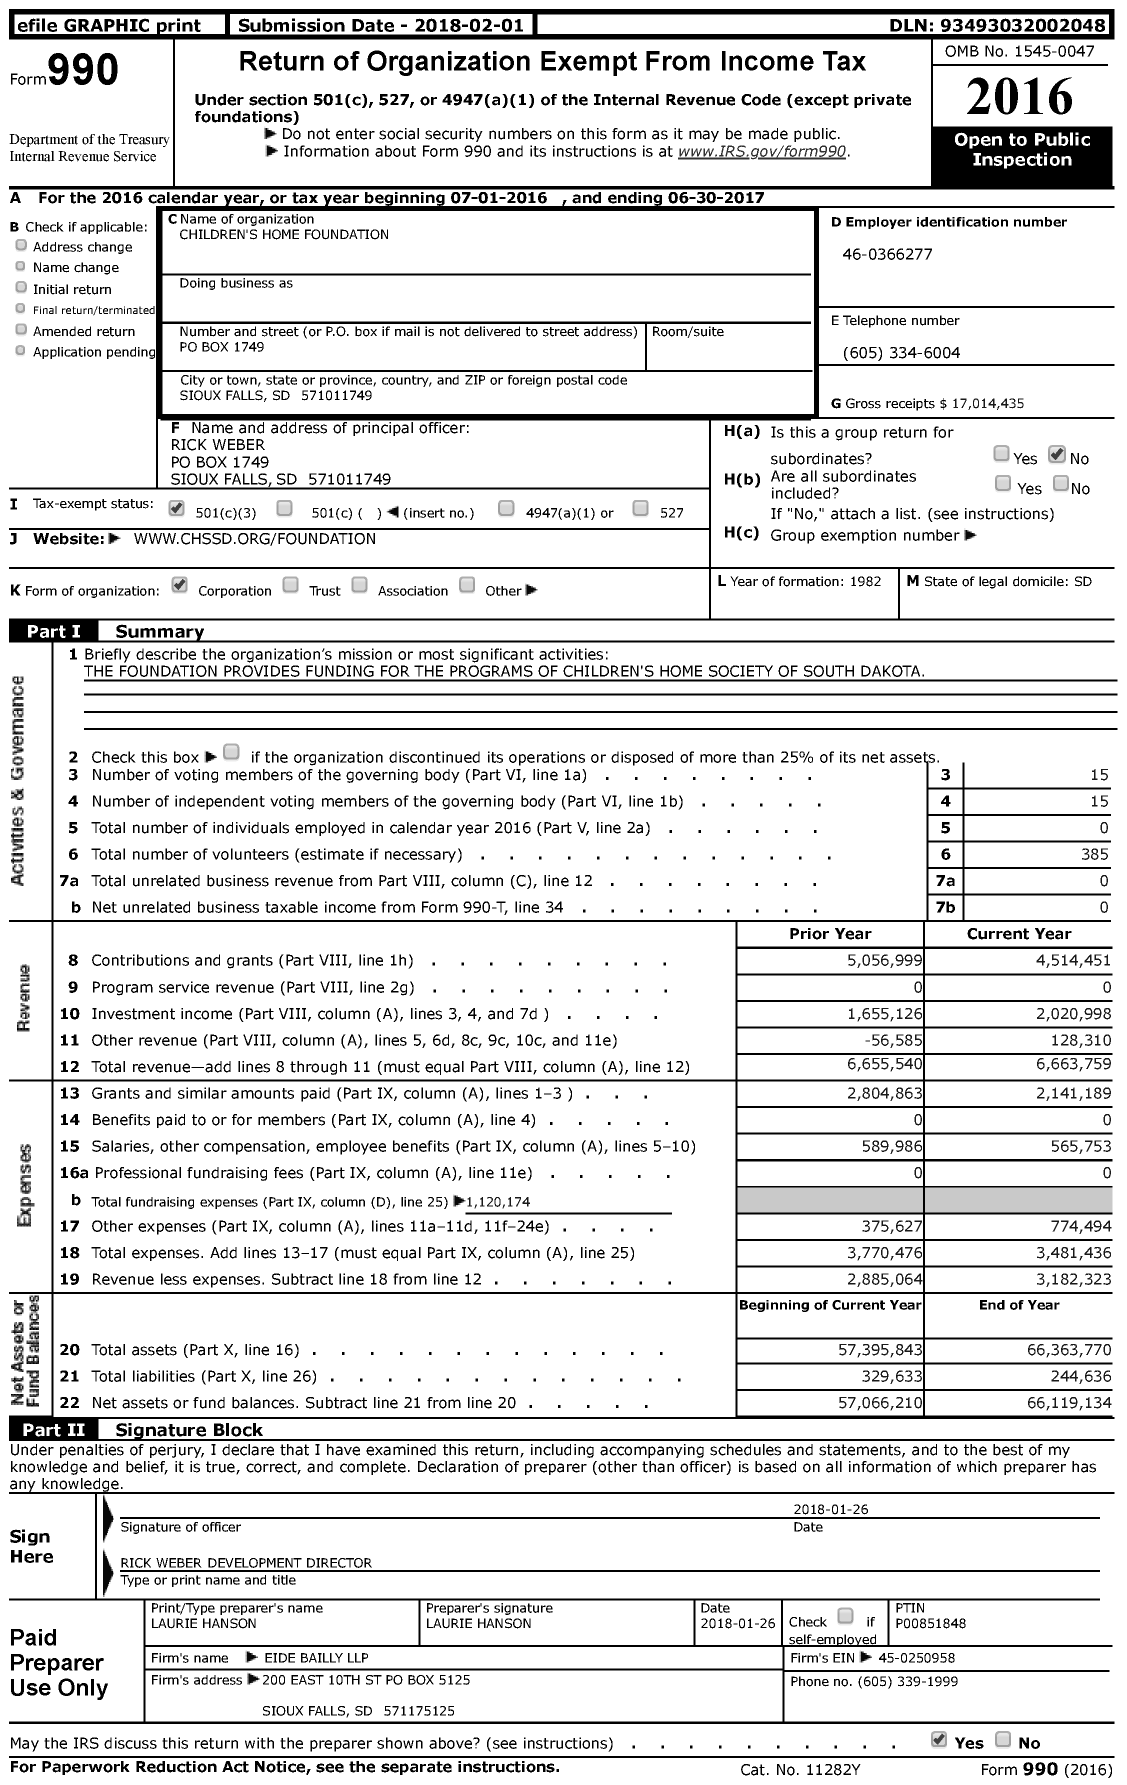 Image of first page of 2016 Form 990 for Children's Home Foundation (CHF)